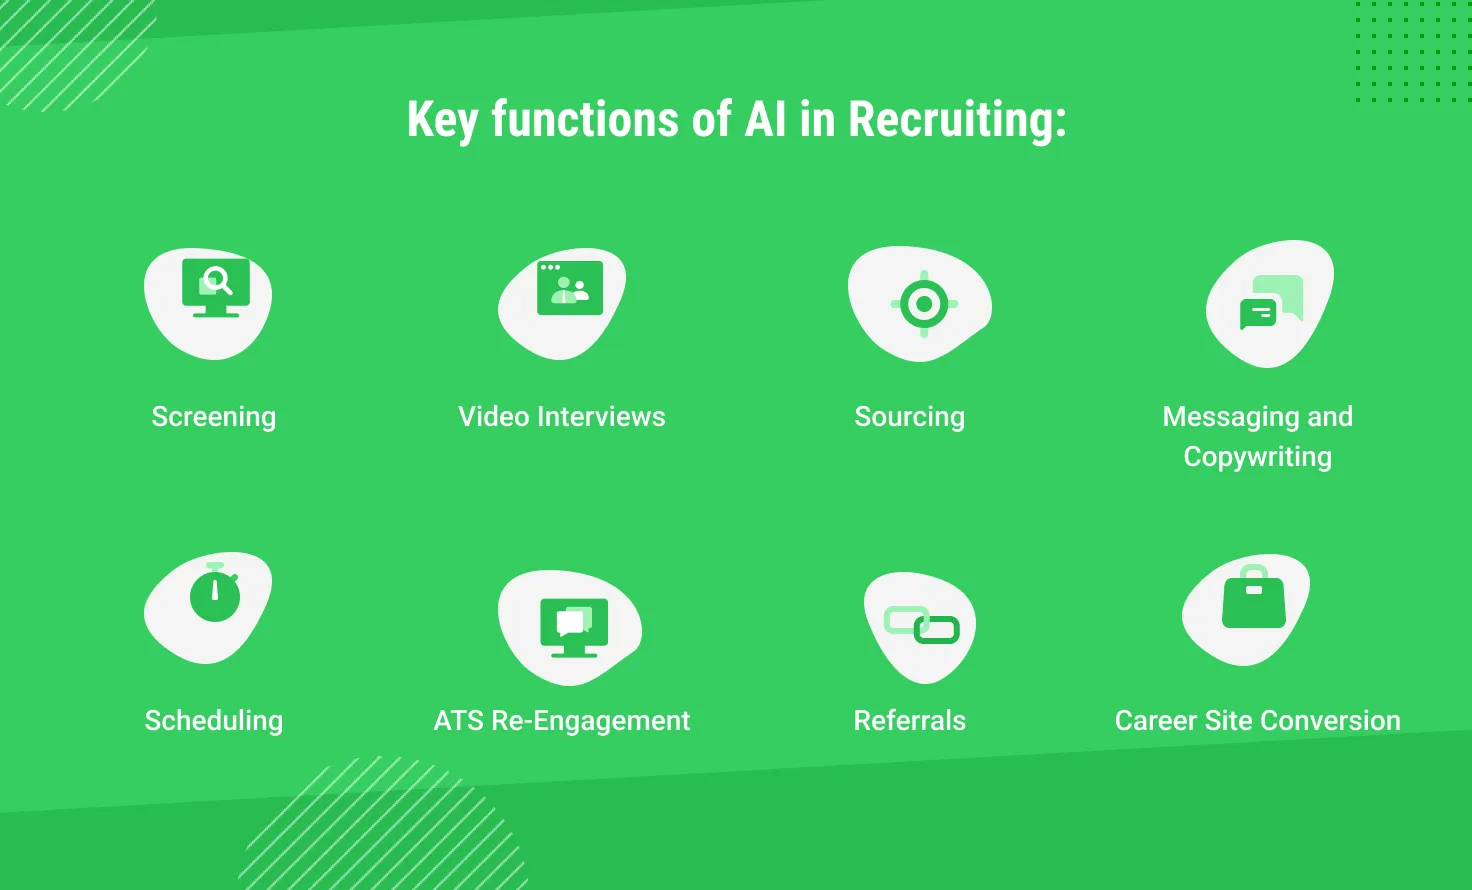 Key functions of AI in recruitment